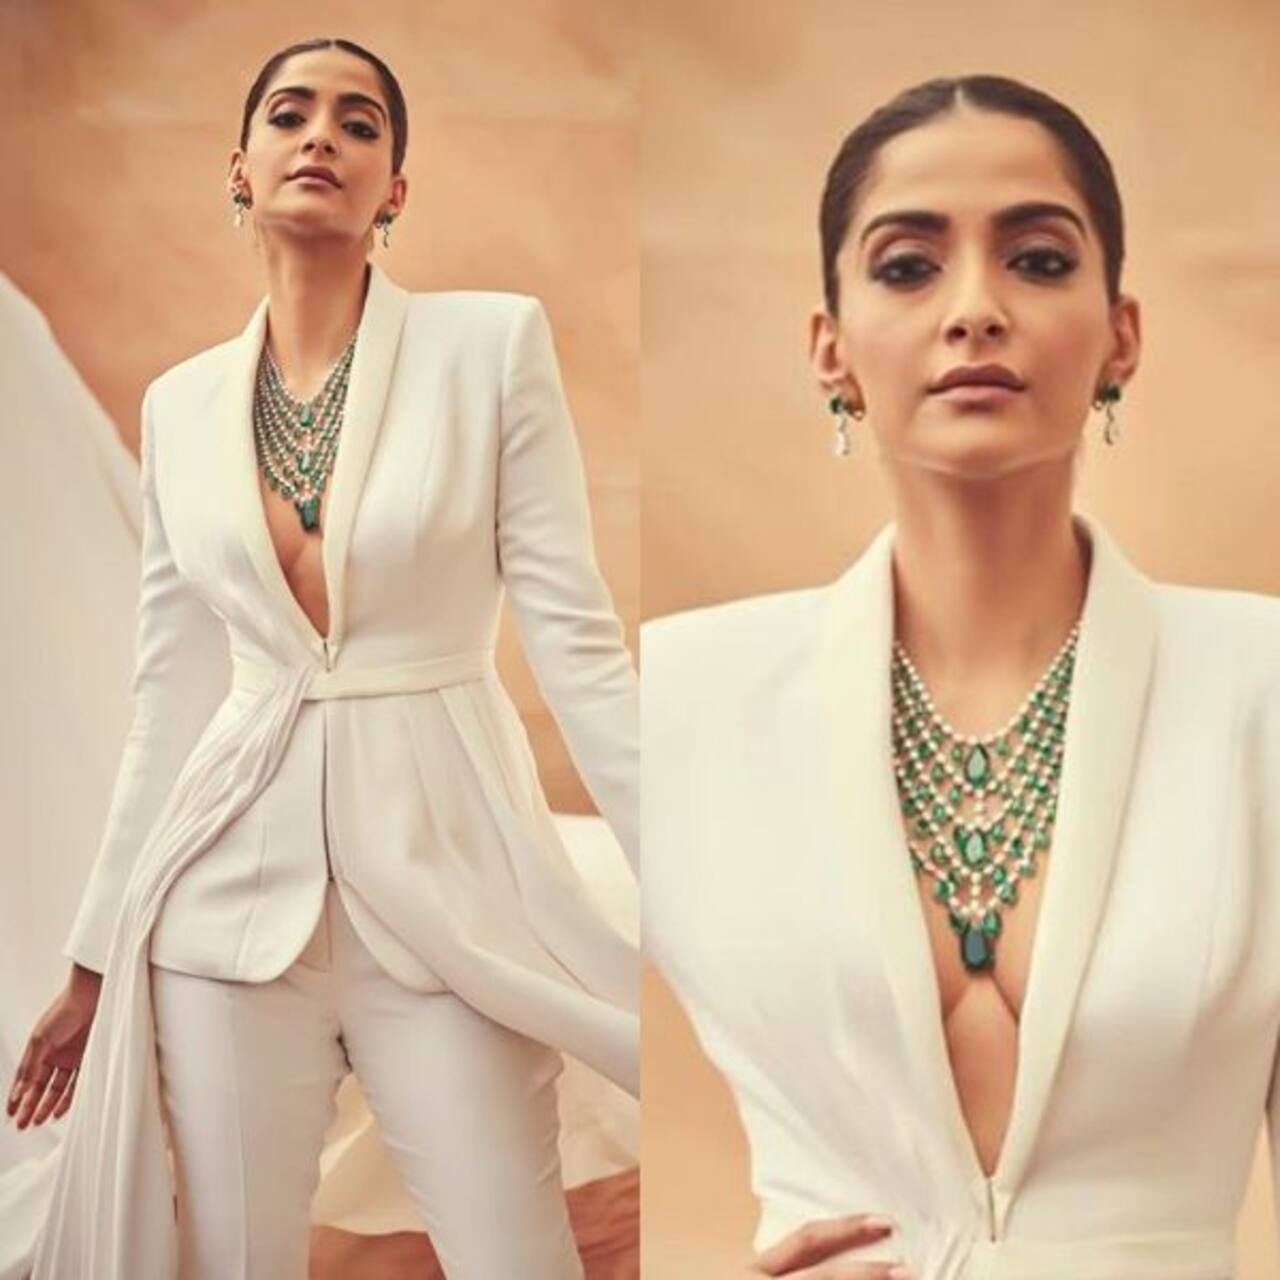 Cannes 2019: ‘The French Riviera suits me,’ says Sonam Kapoor as she stuns in a custom-made white tuxedo – view pics